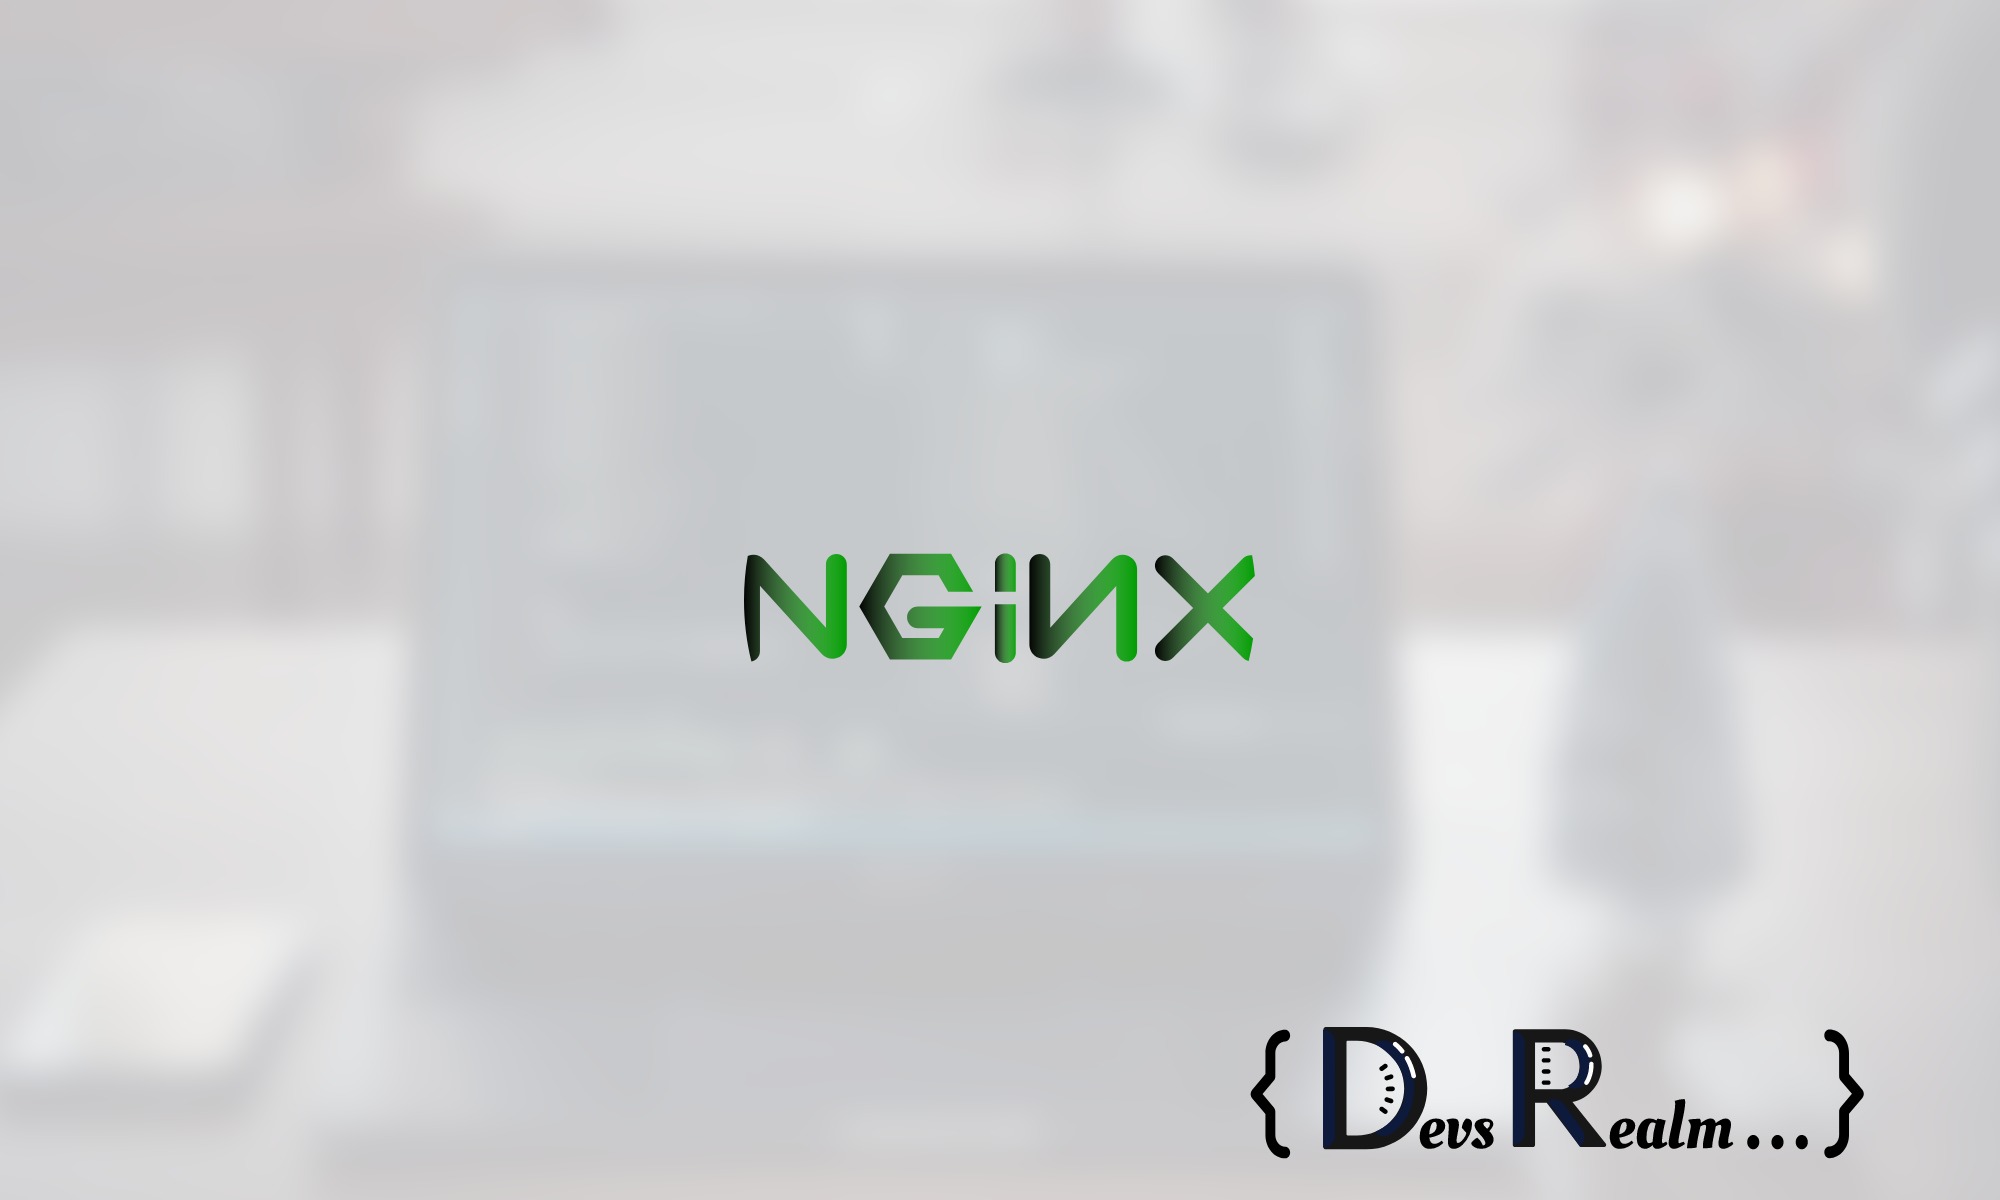 Installing and Configuring Nginx